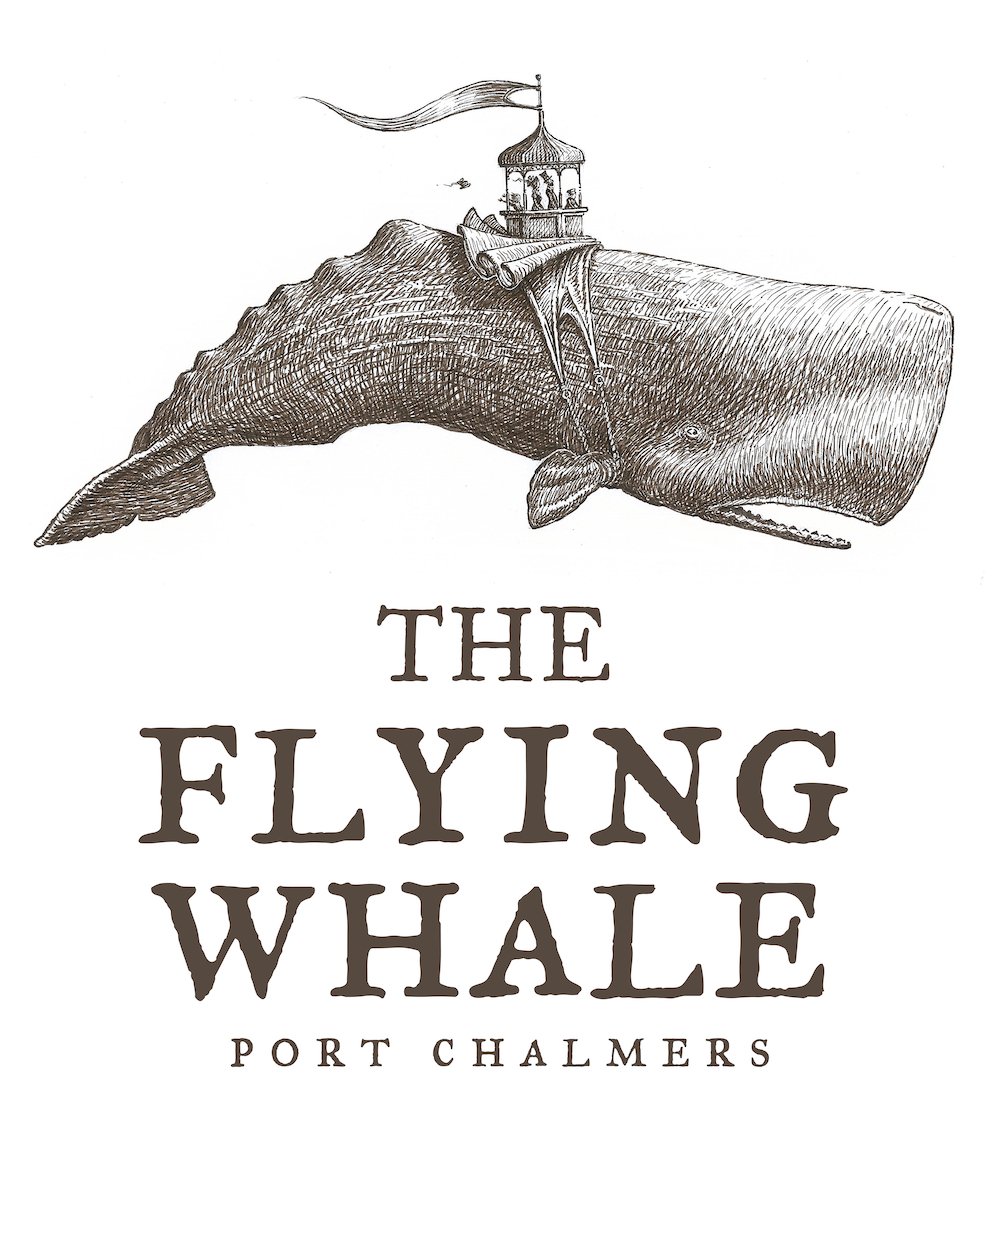 The flying Whale Gallery logo.jpeg